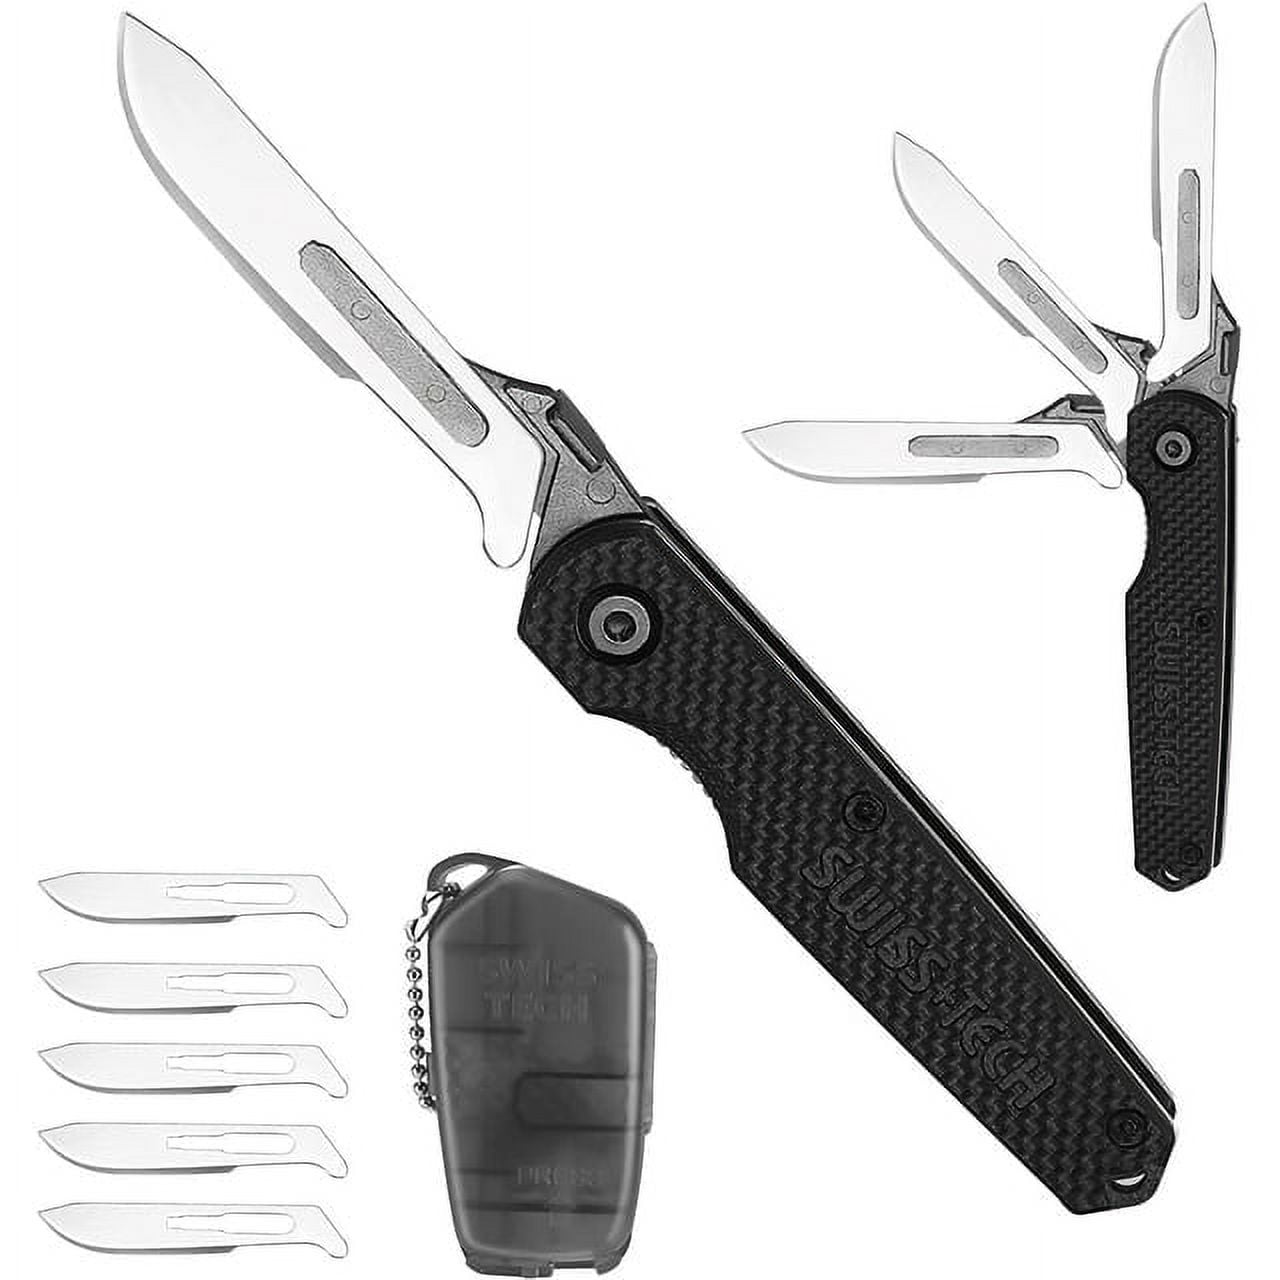  Swiss+Tech EDC Knife, Folding Pocket Knife with 5PCS  Razor-Sharp Replaceable Blades, Belt Clip, Liner Lock & Aluminum Alloy  Handle,Skinning Knives for Hunting, Survival, Fishing, Outdoor Skinning  Deer : Tools & Home